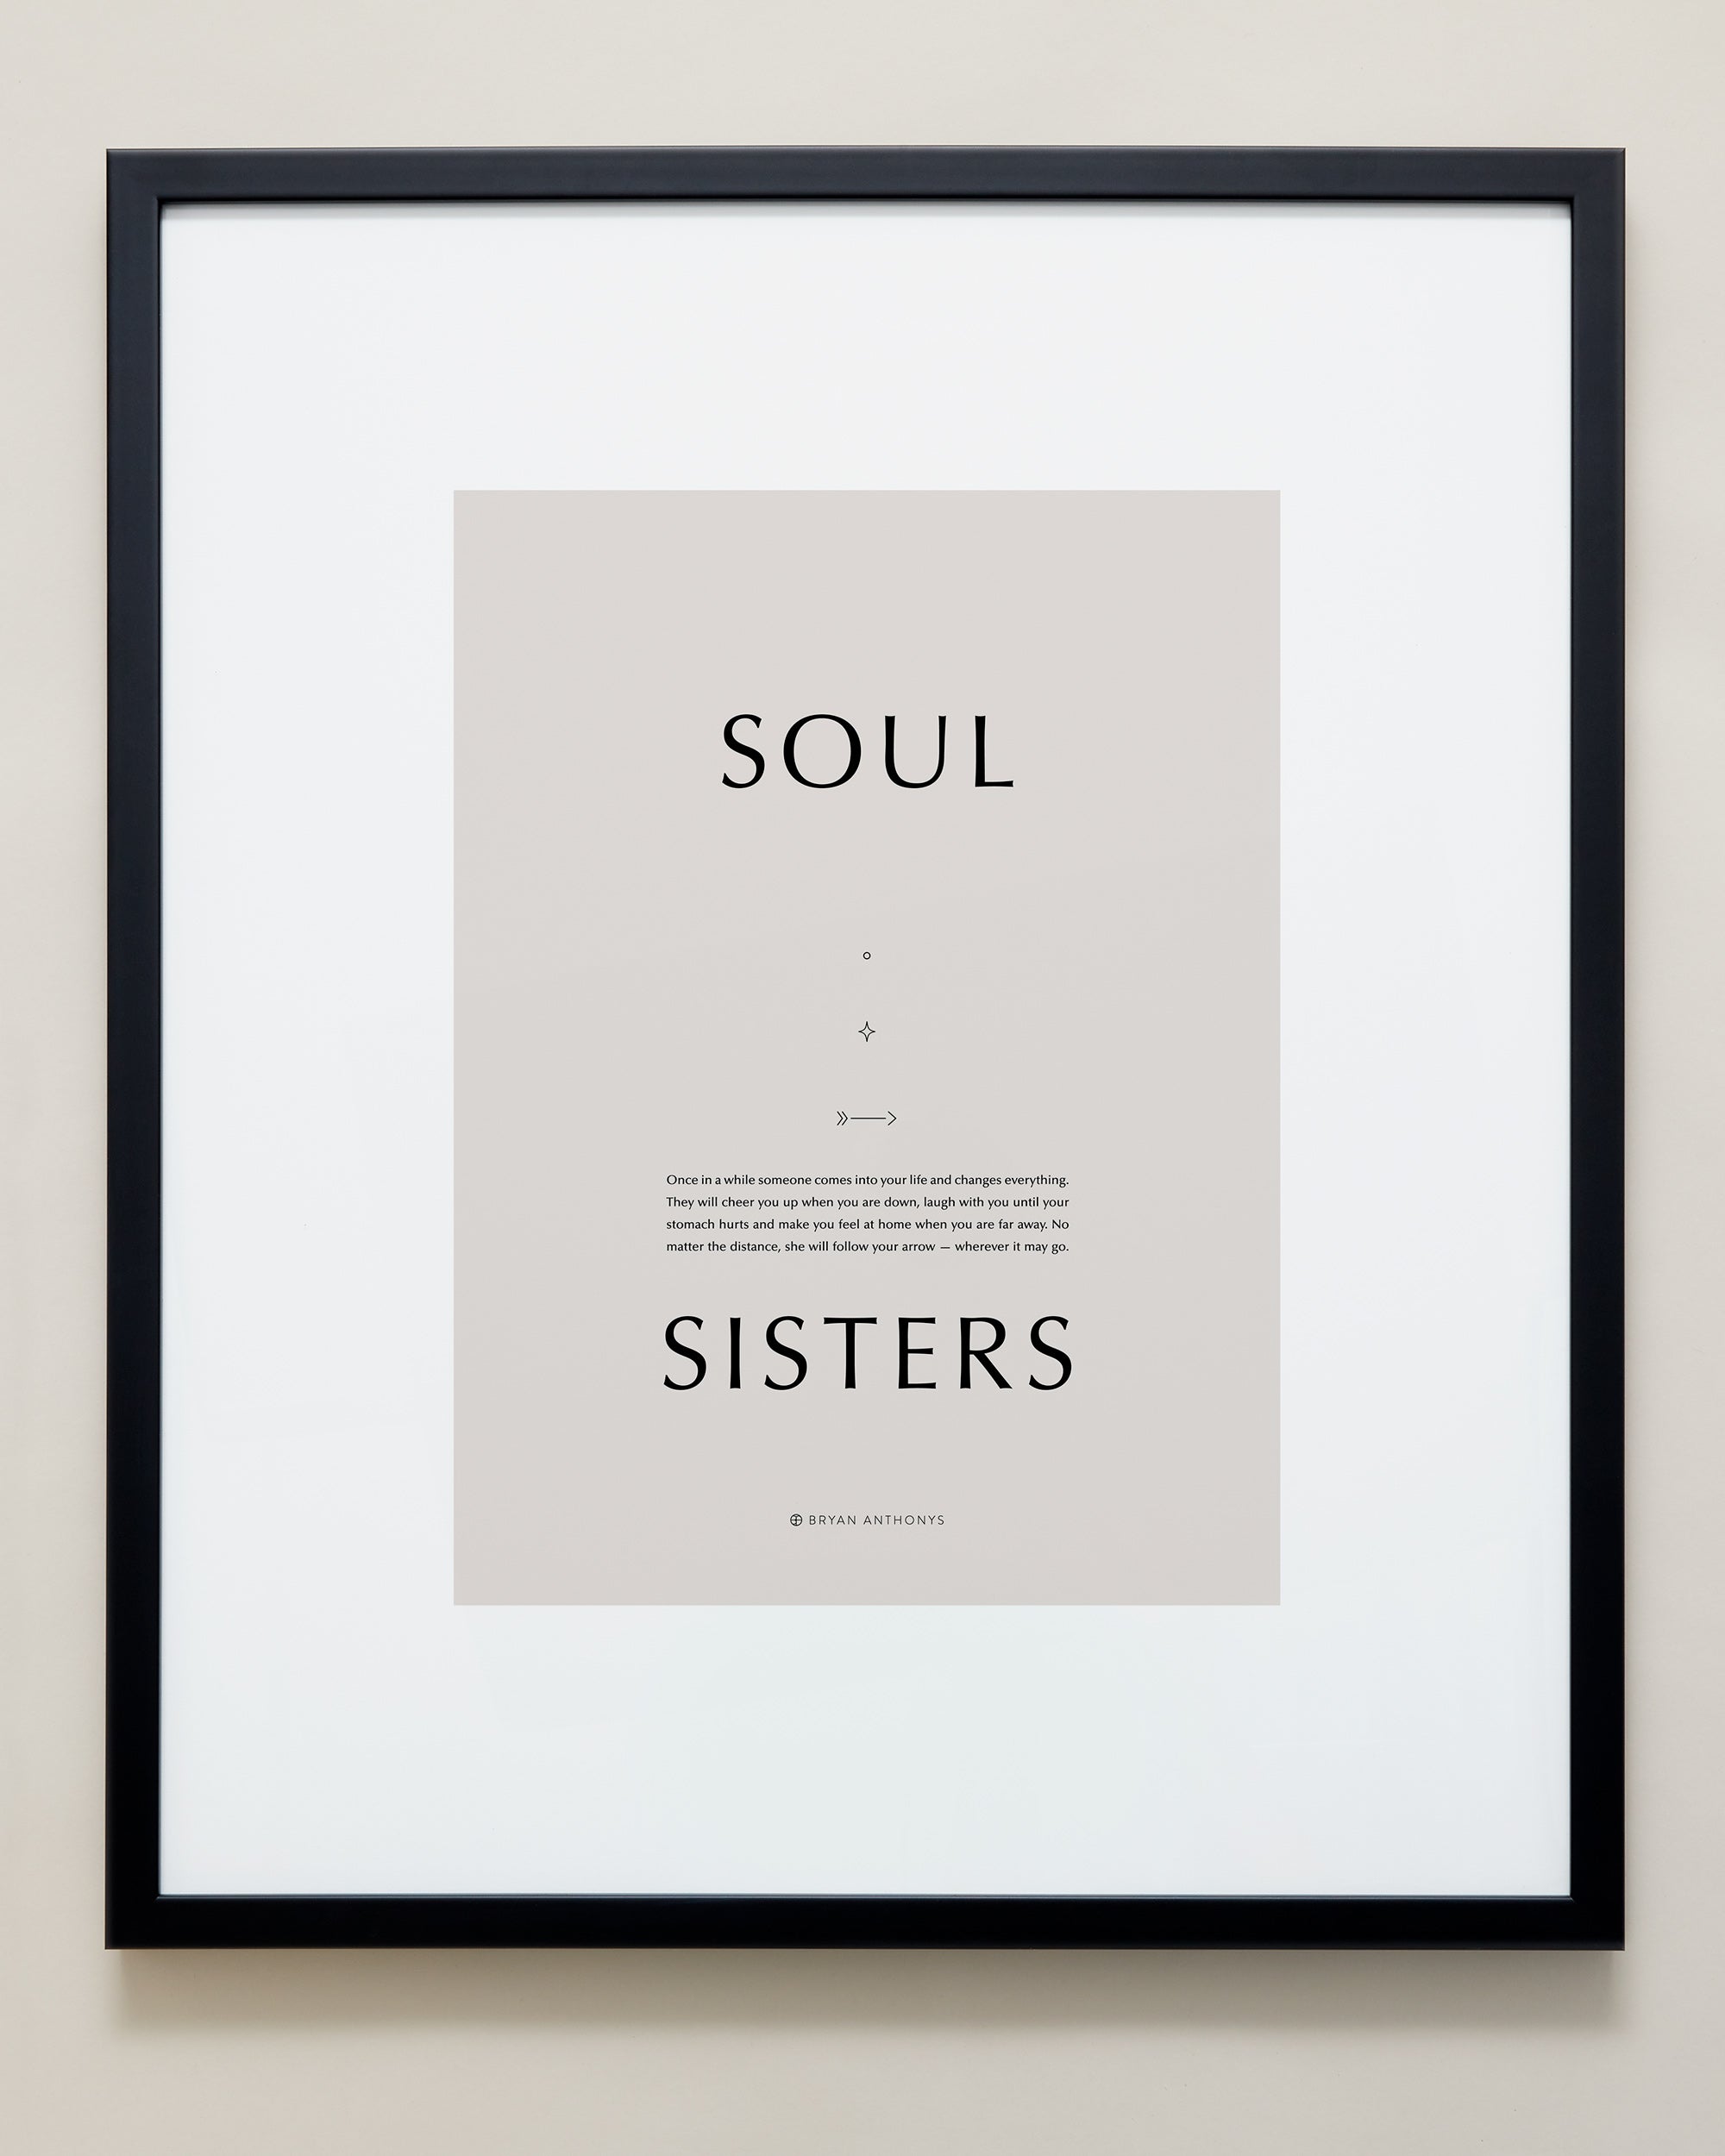 Bryan Anthonys Home Decor Purposeful Prints Soul Sisters Iconic Framed Print Tan Art with Black Frame 20x24